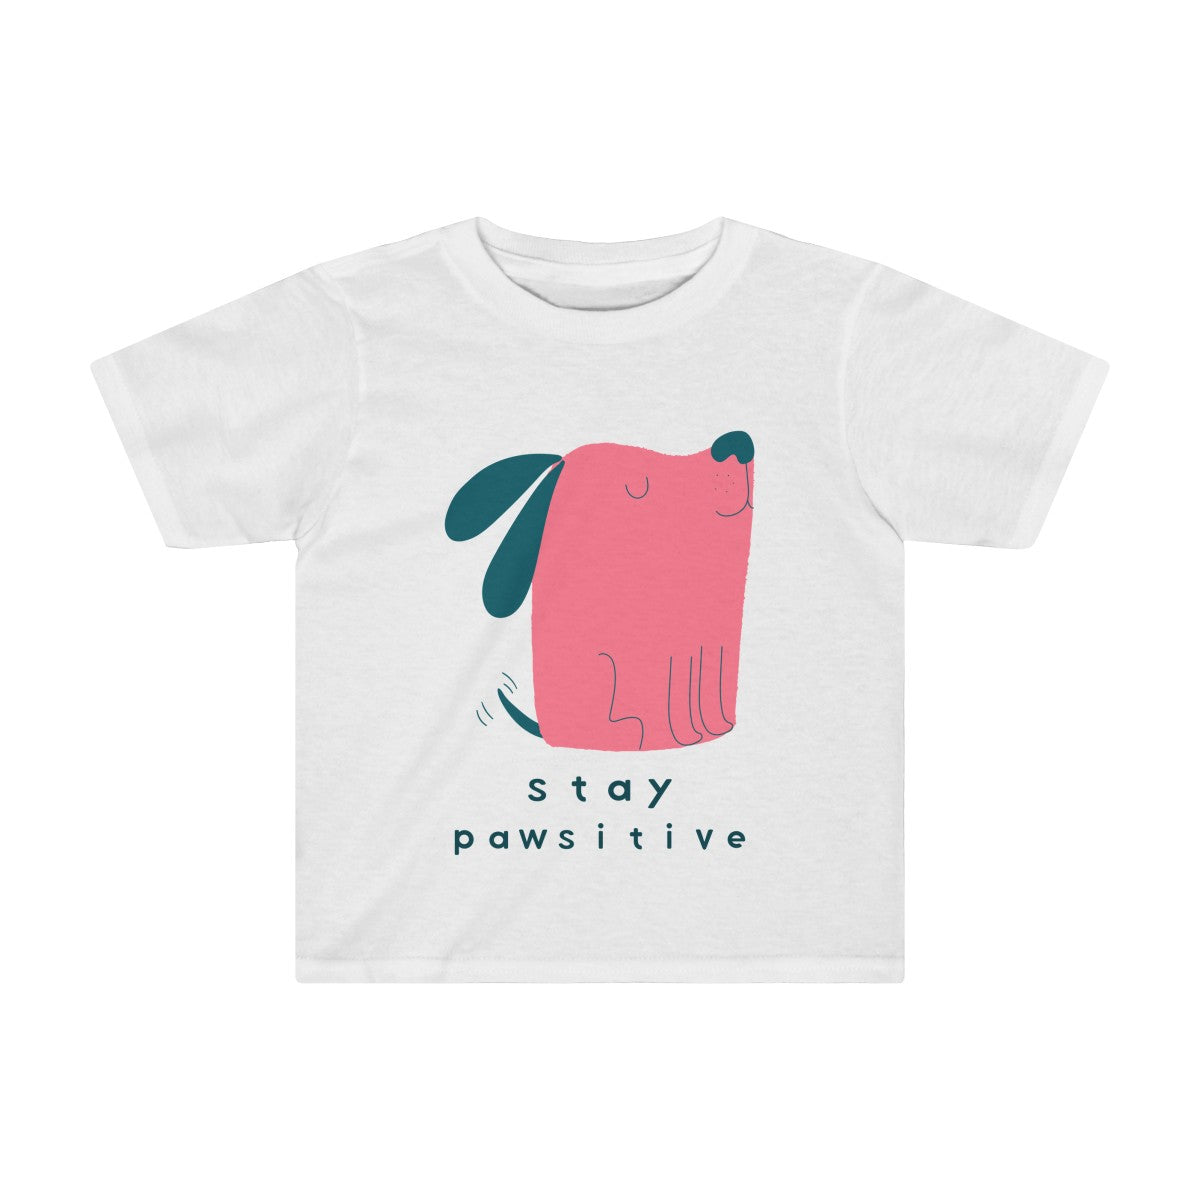 Stay Pawsitive Kids Tee-Kids clothes-PureDesignTees